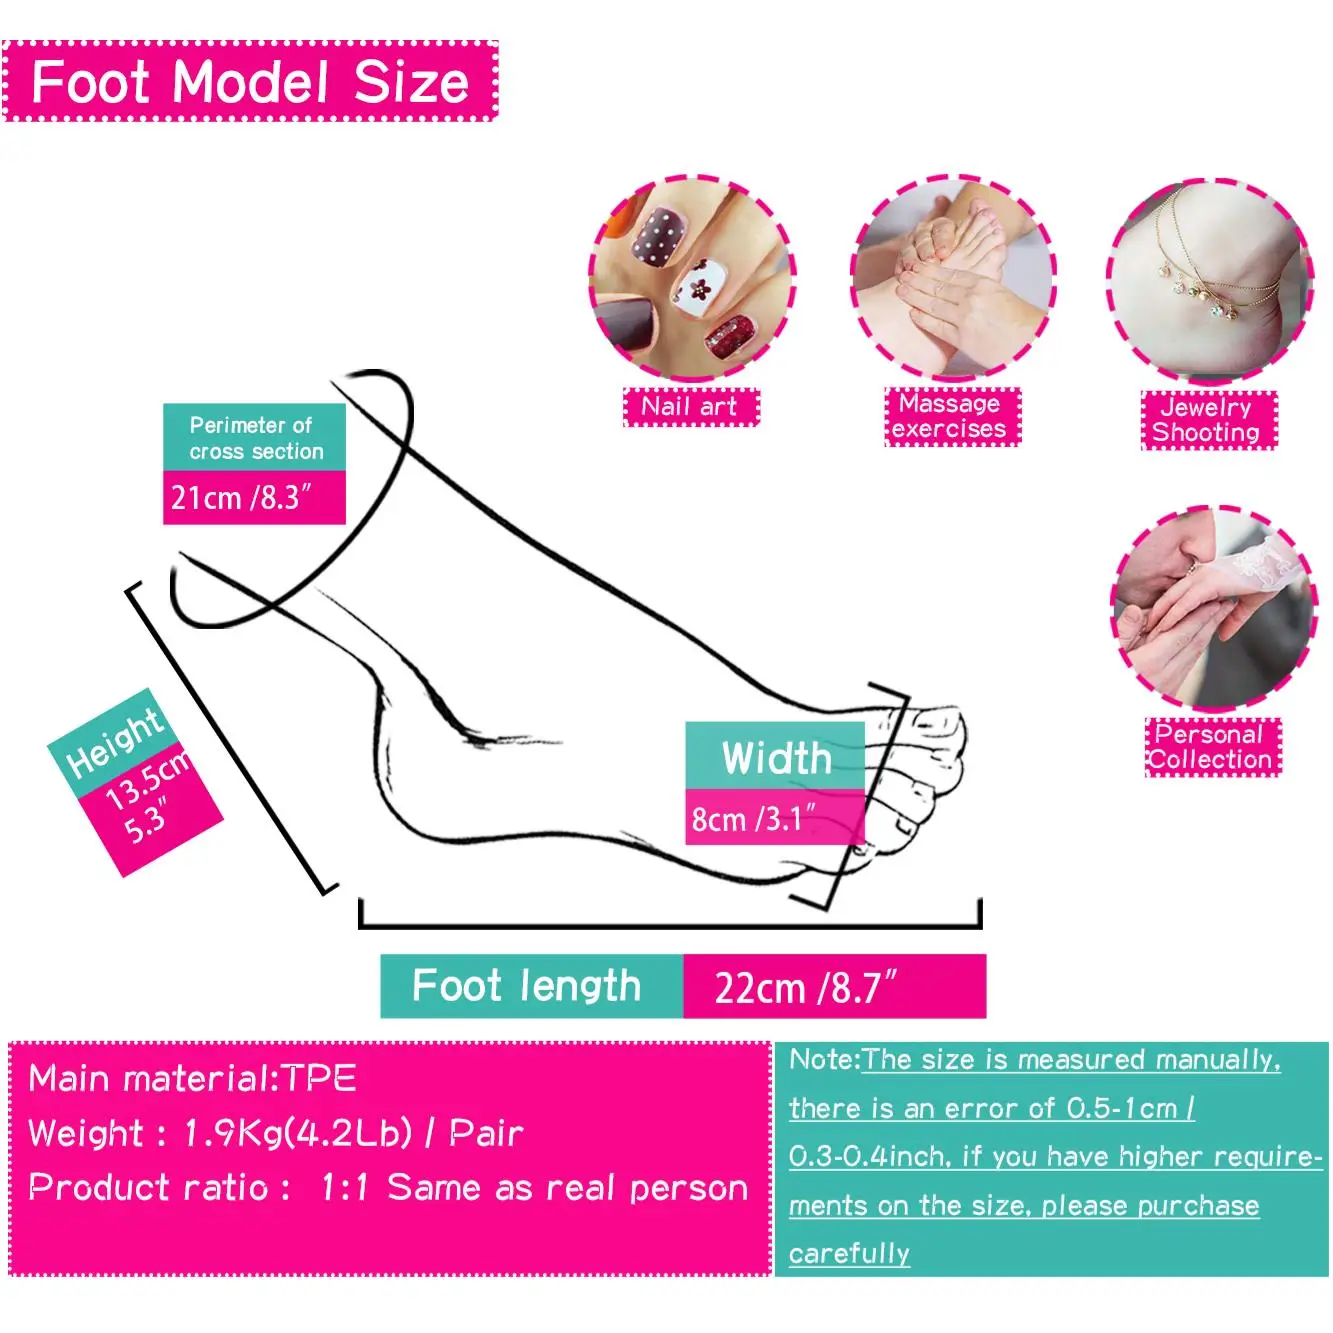 Female Silicone Foot Model Direct Selling Simulation Nail Practice Mannequin Feet Fetish For Footjob Shoes Sock Display TGJ36